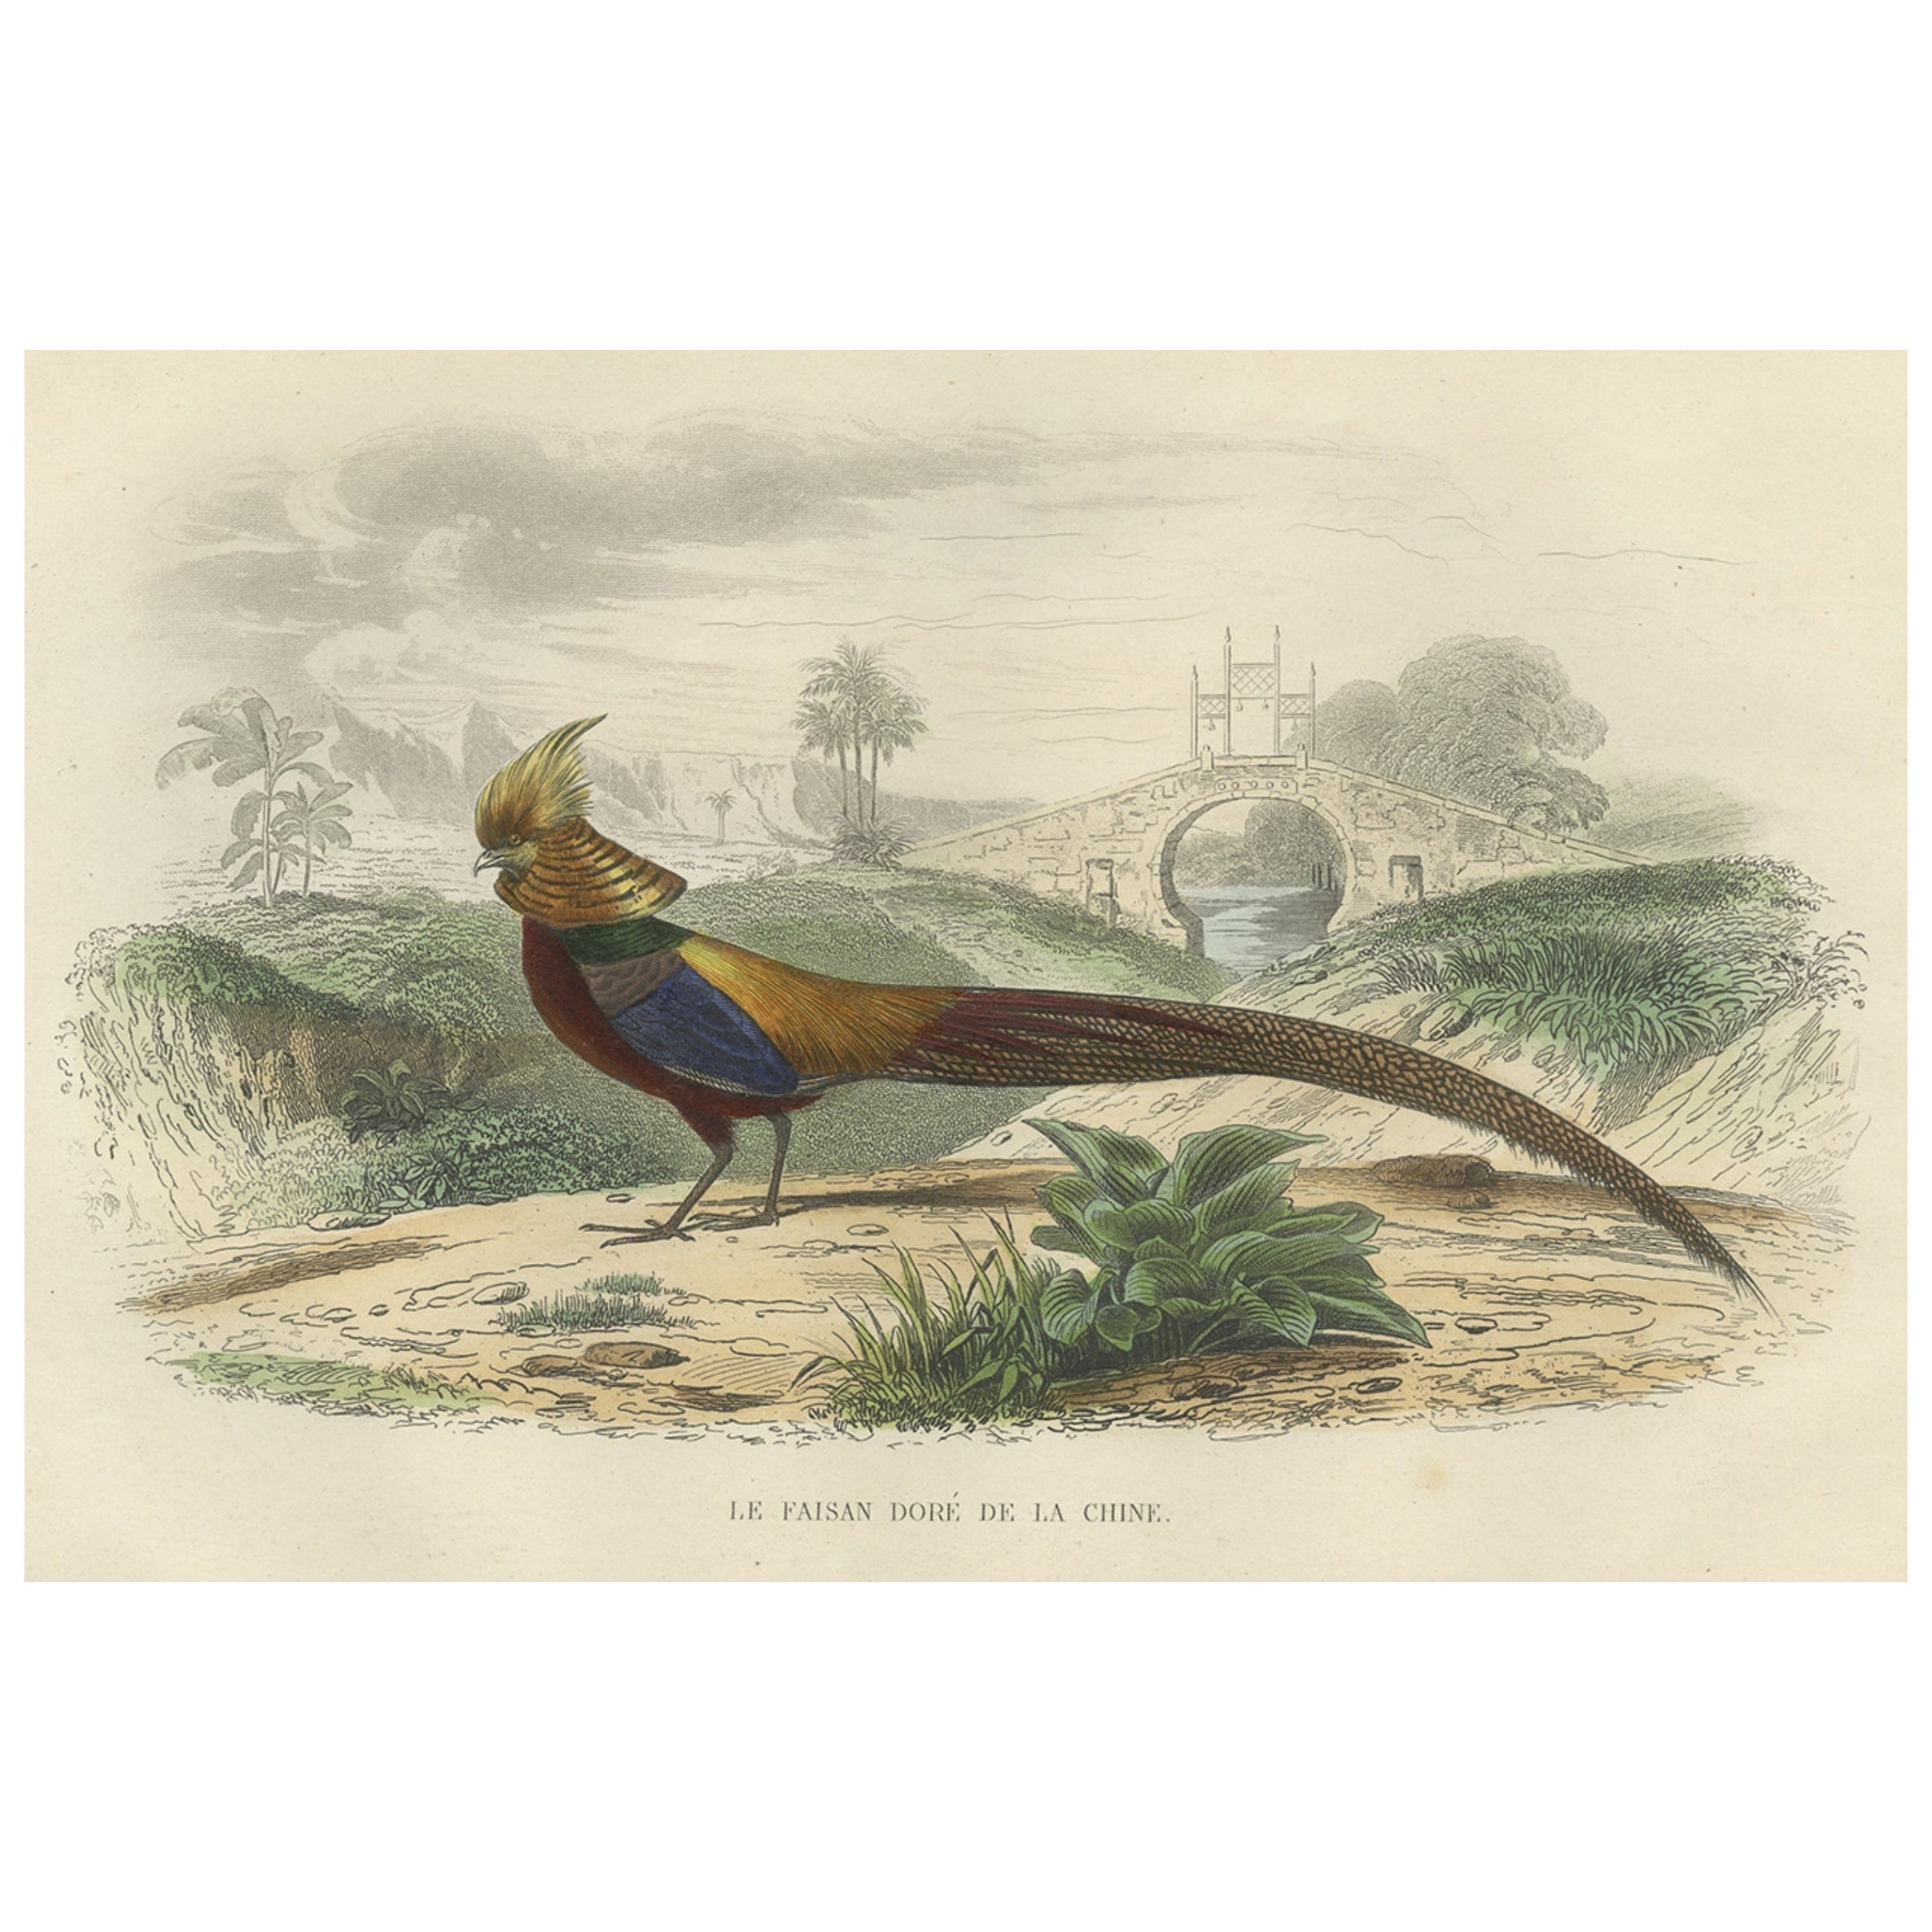 Beautiful Decorative Hand-Colored Print of a Golden Pheasant from China, C.1840